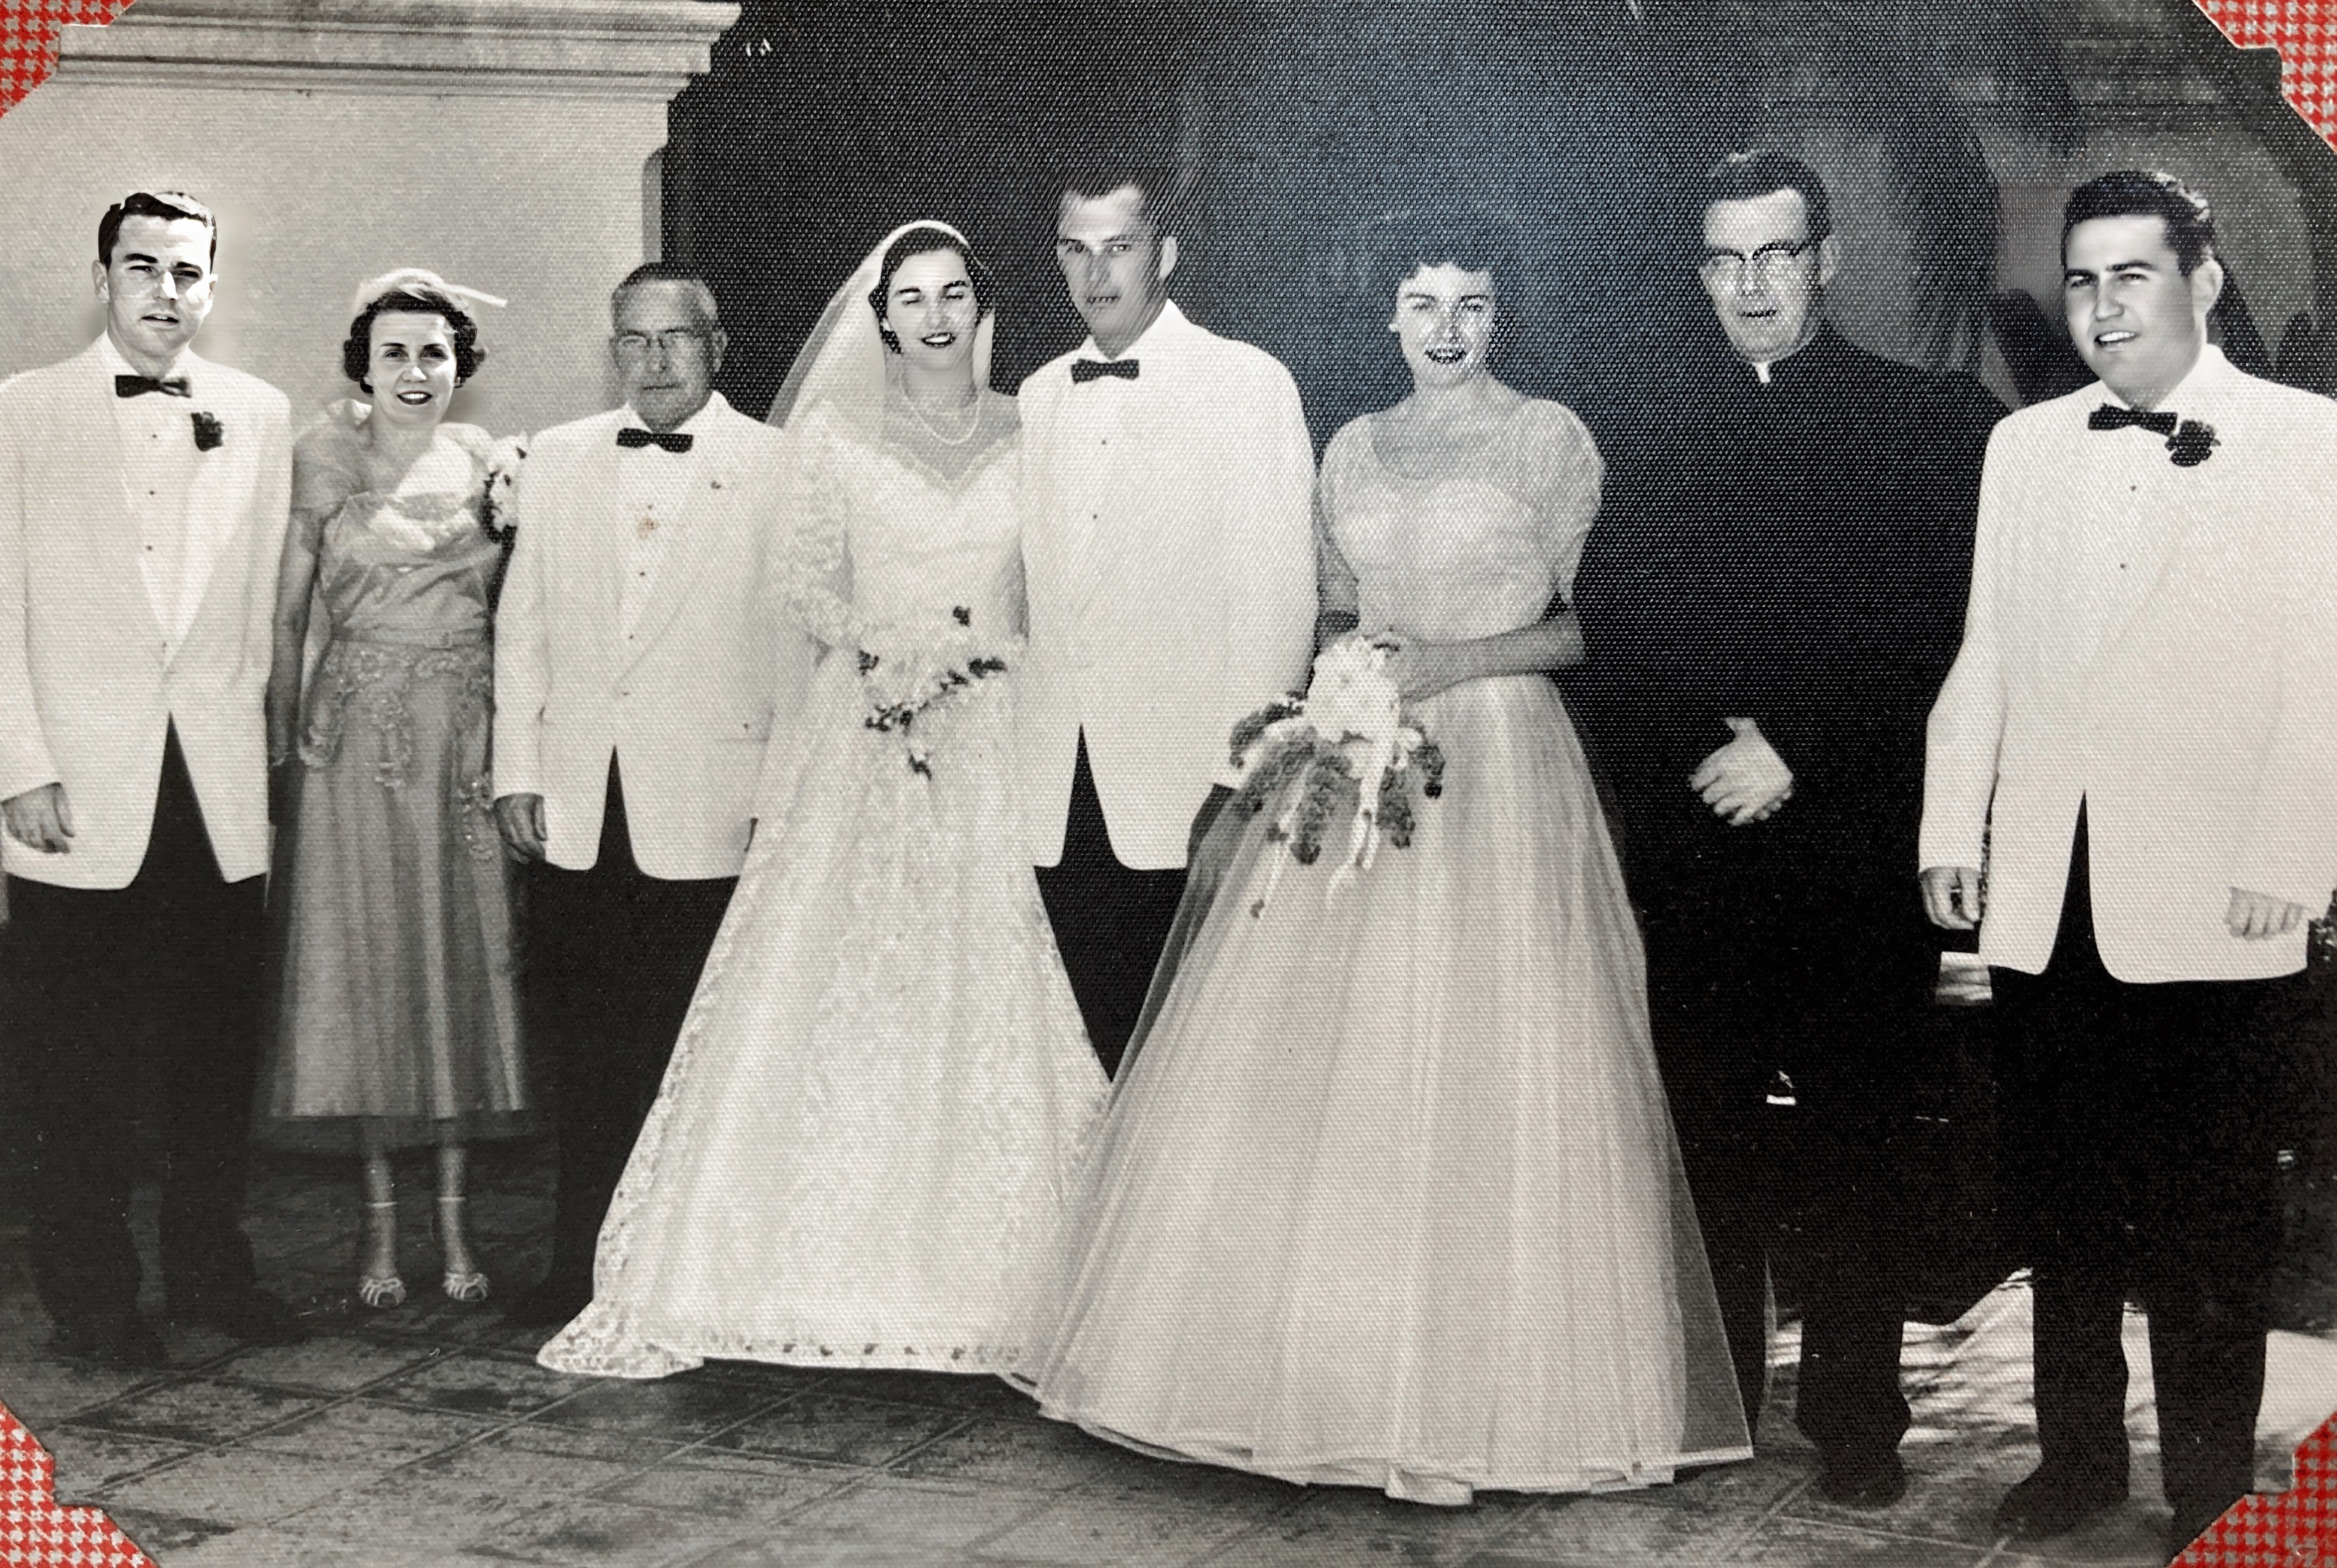 Wedding 8/21/1954 Roberta Bauer and Jim Engelschall
L-R Jack Bauer, his mother Mary, father Bob Bauer, Roberta (bride) Jim (groom) priest and ?